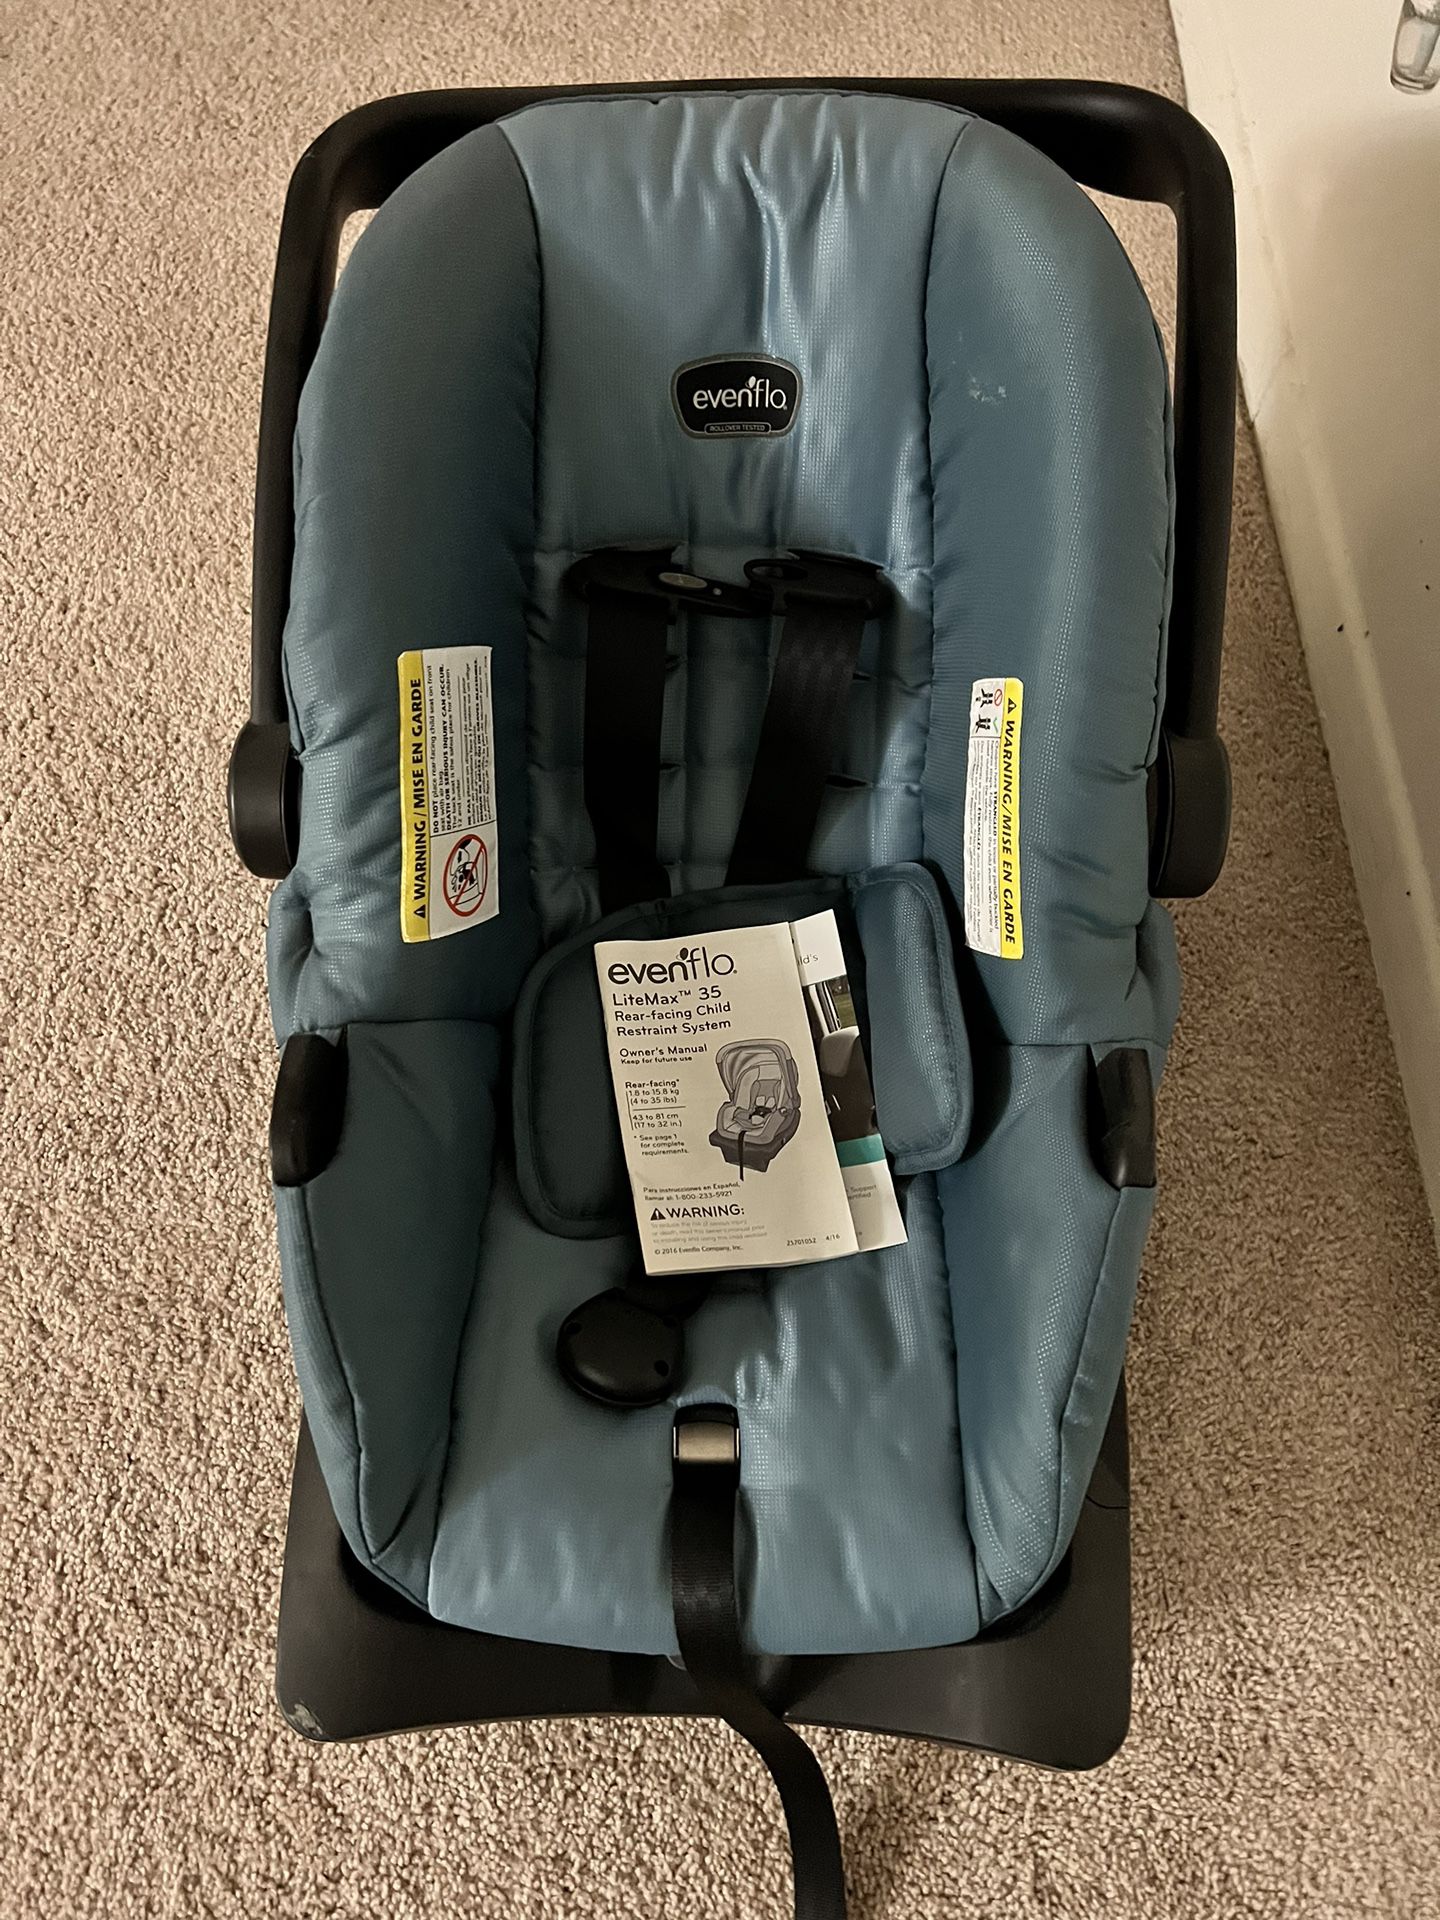 FREE!! Moving Out! Evenflo LiteMax 35 - Infant Car Seat!